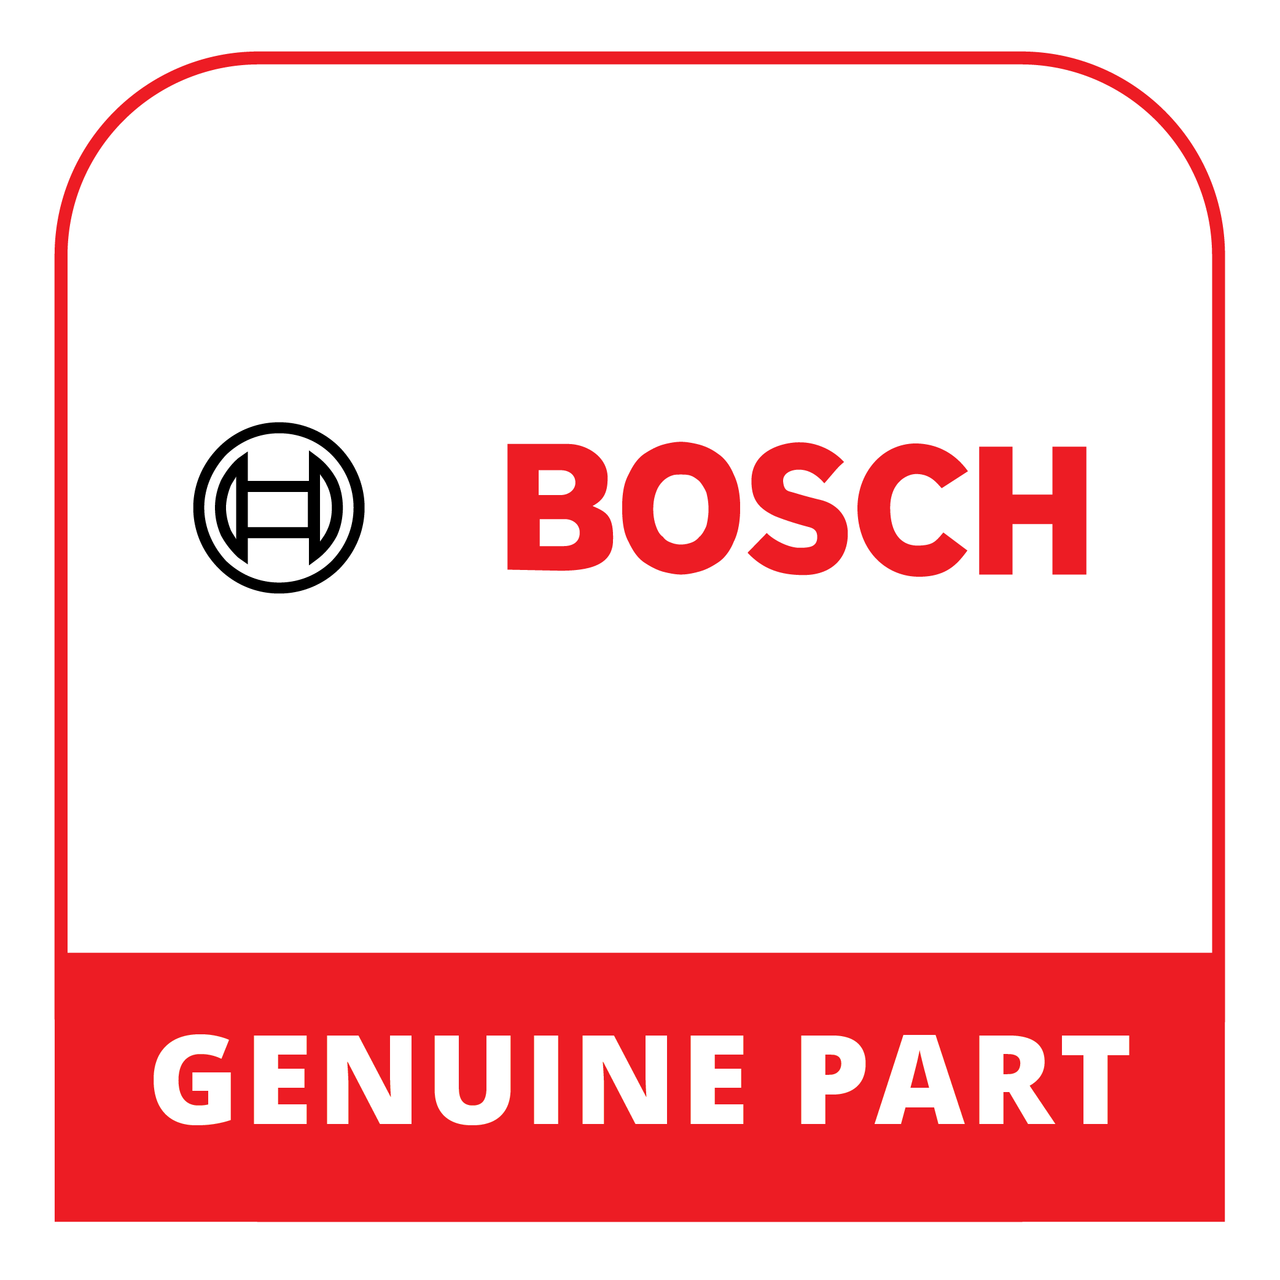 Bosch 10004832 - Clamping Piece - Genuine Bosch (Thermador) Part